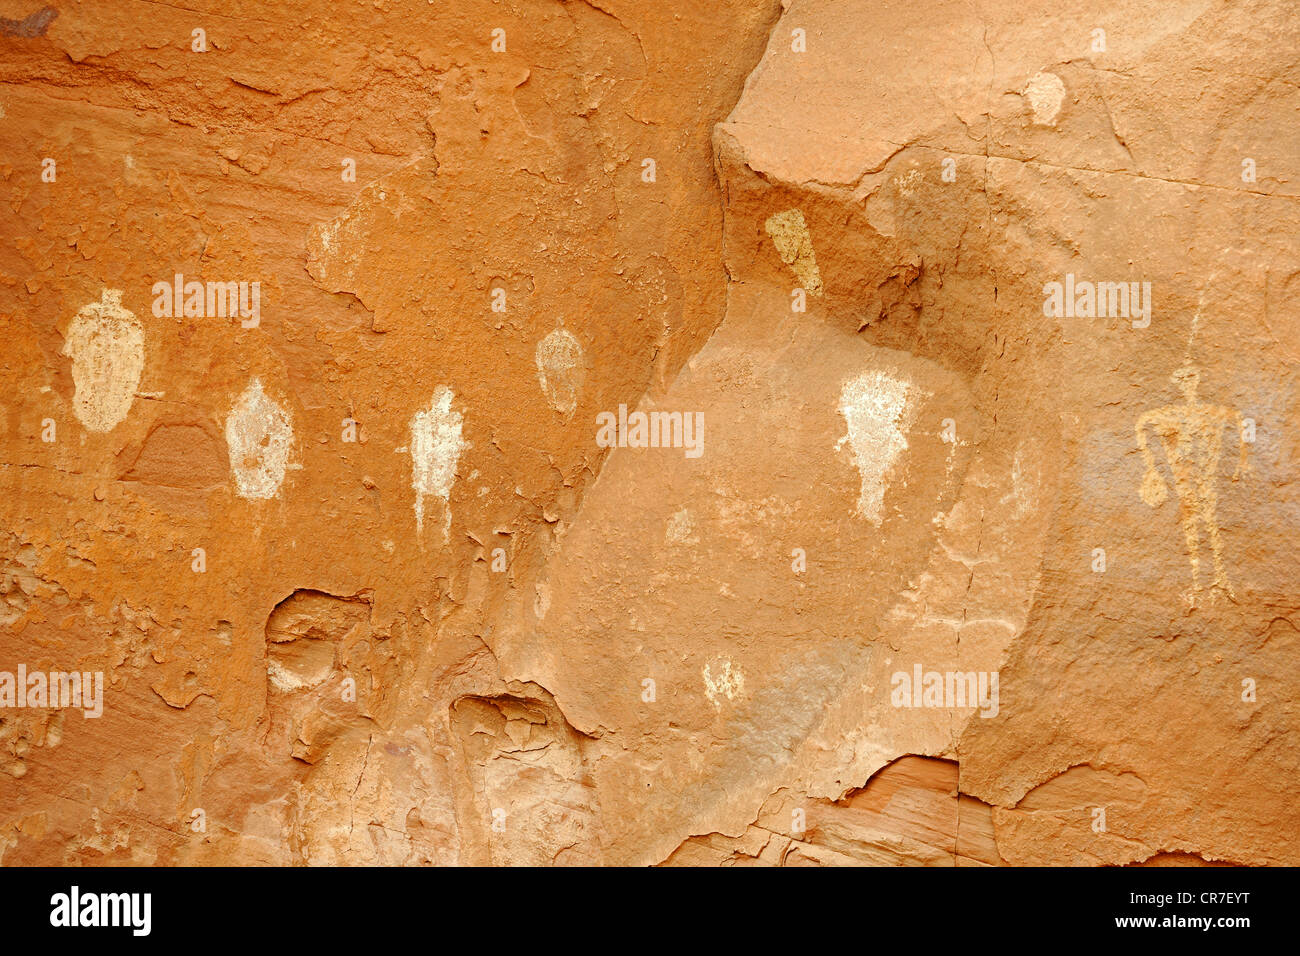 Approx. 1500 year old palm prints and drawings by Native Americans, Mystery Valley, Arizona, USA Stock Photo